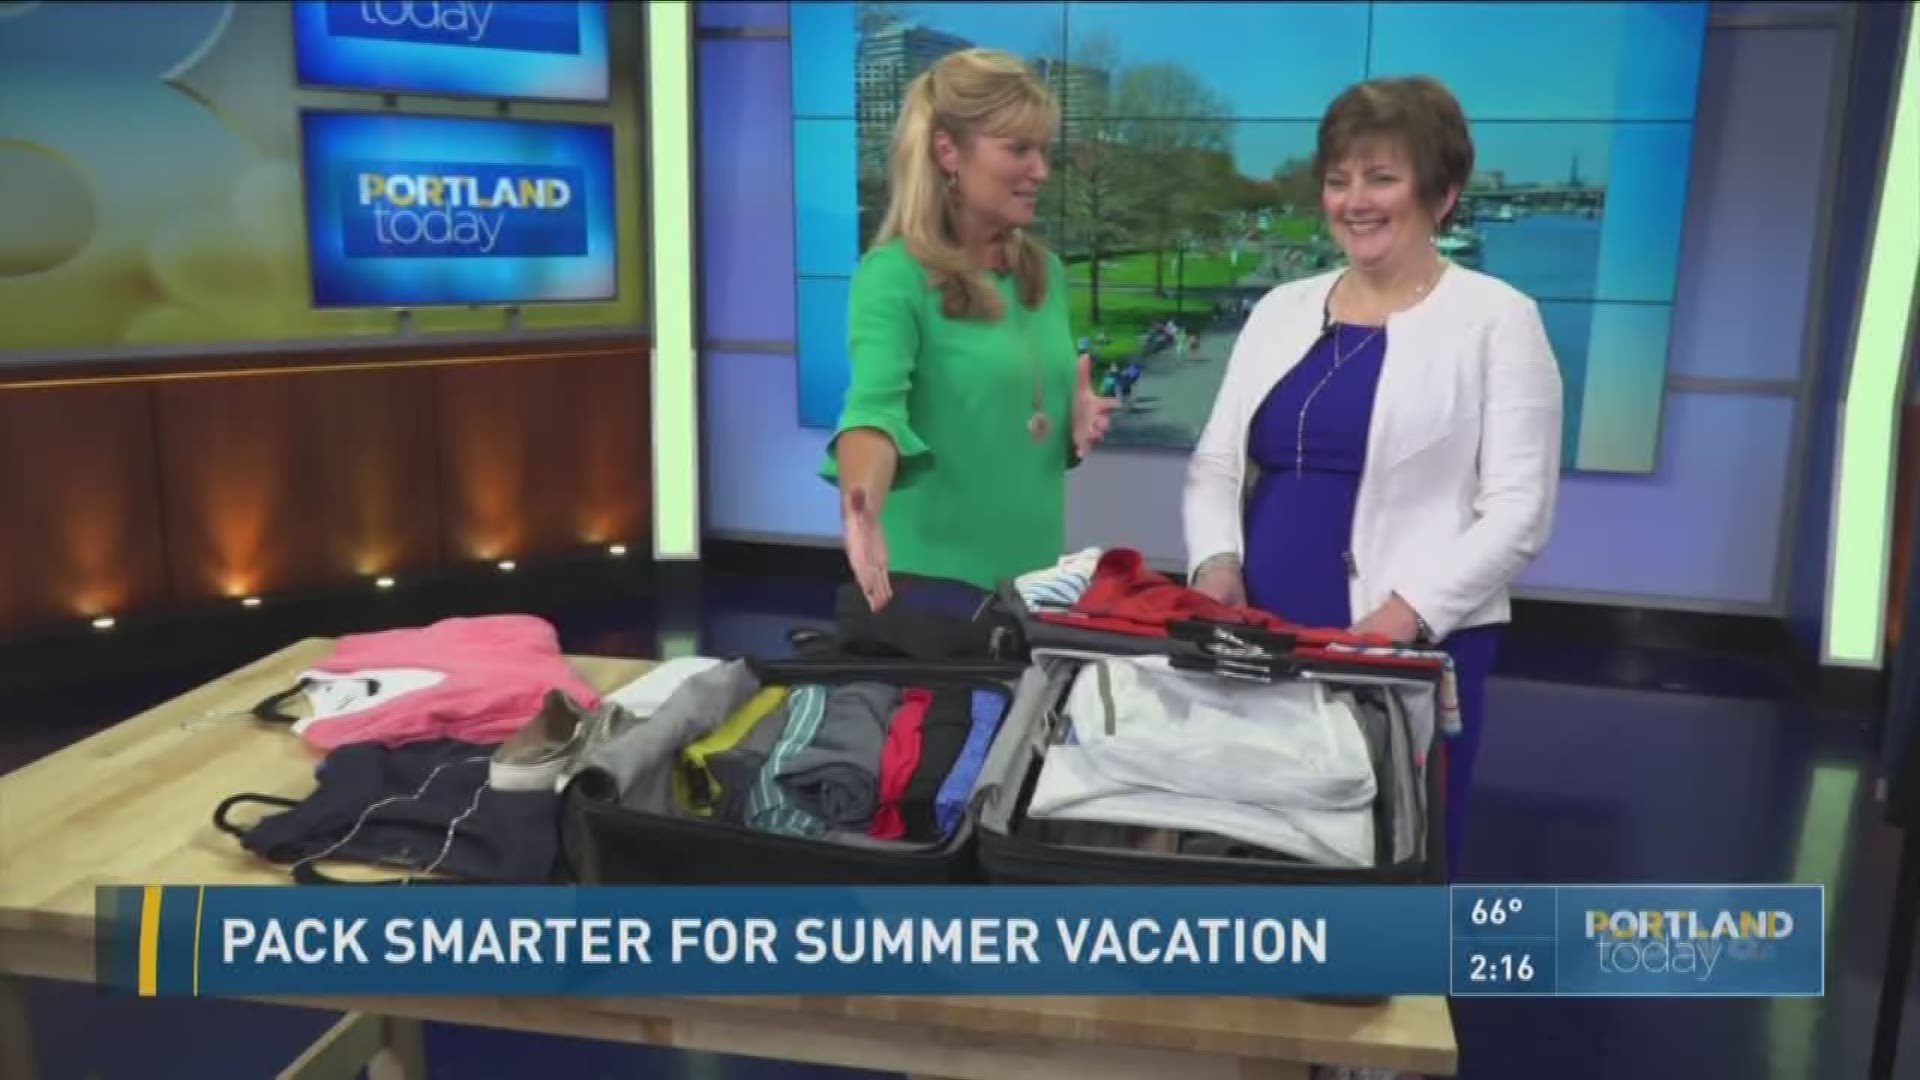 Pack smarter for summer vacation